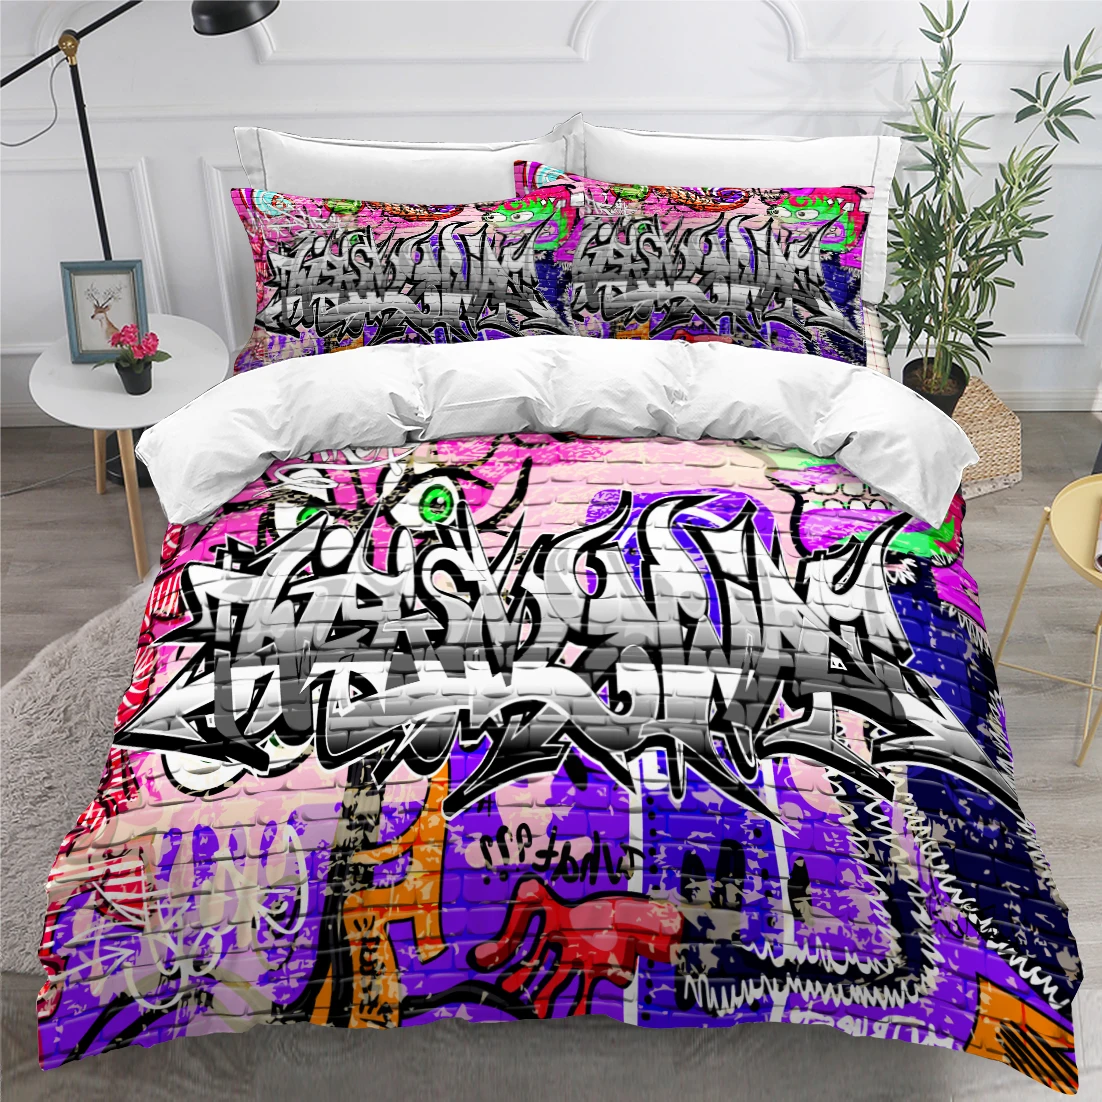 

Eurppe and America Duvet Cover Set Bedding Sets Comforter Case Pillowcase Full Twin Single Double Size 3D Graffiti Bed Linen